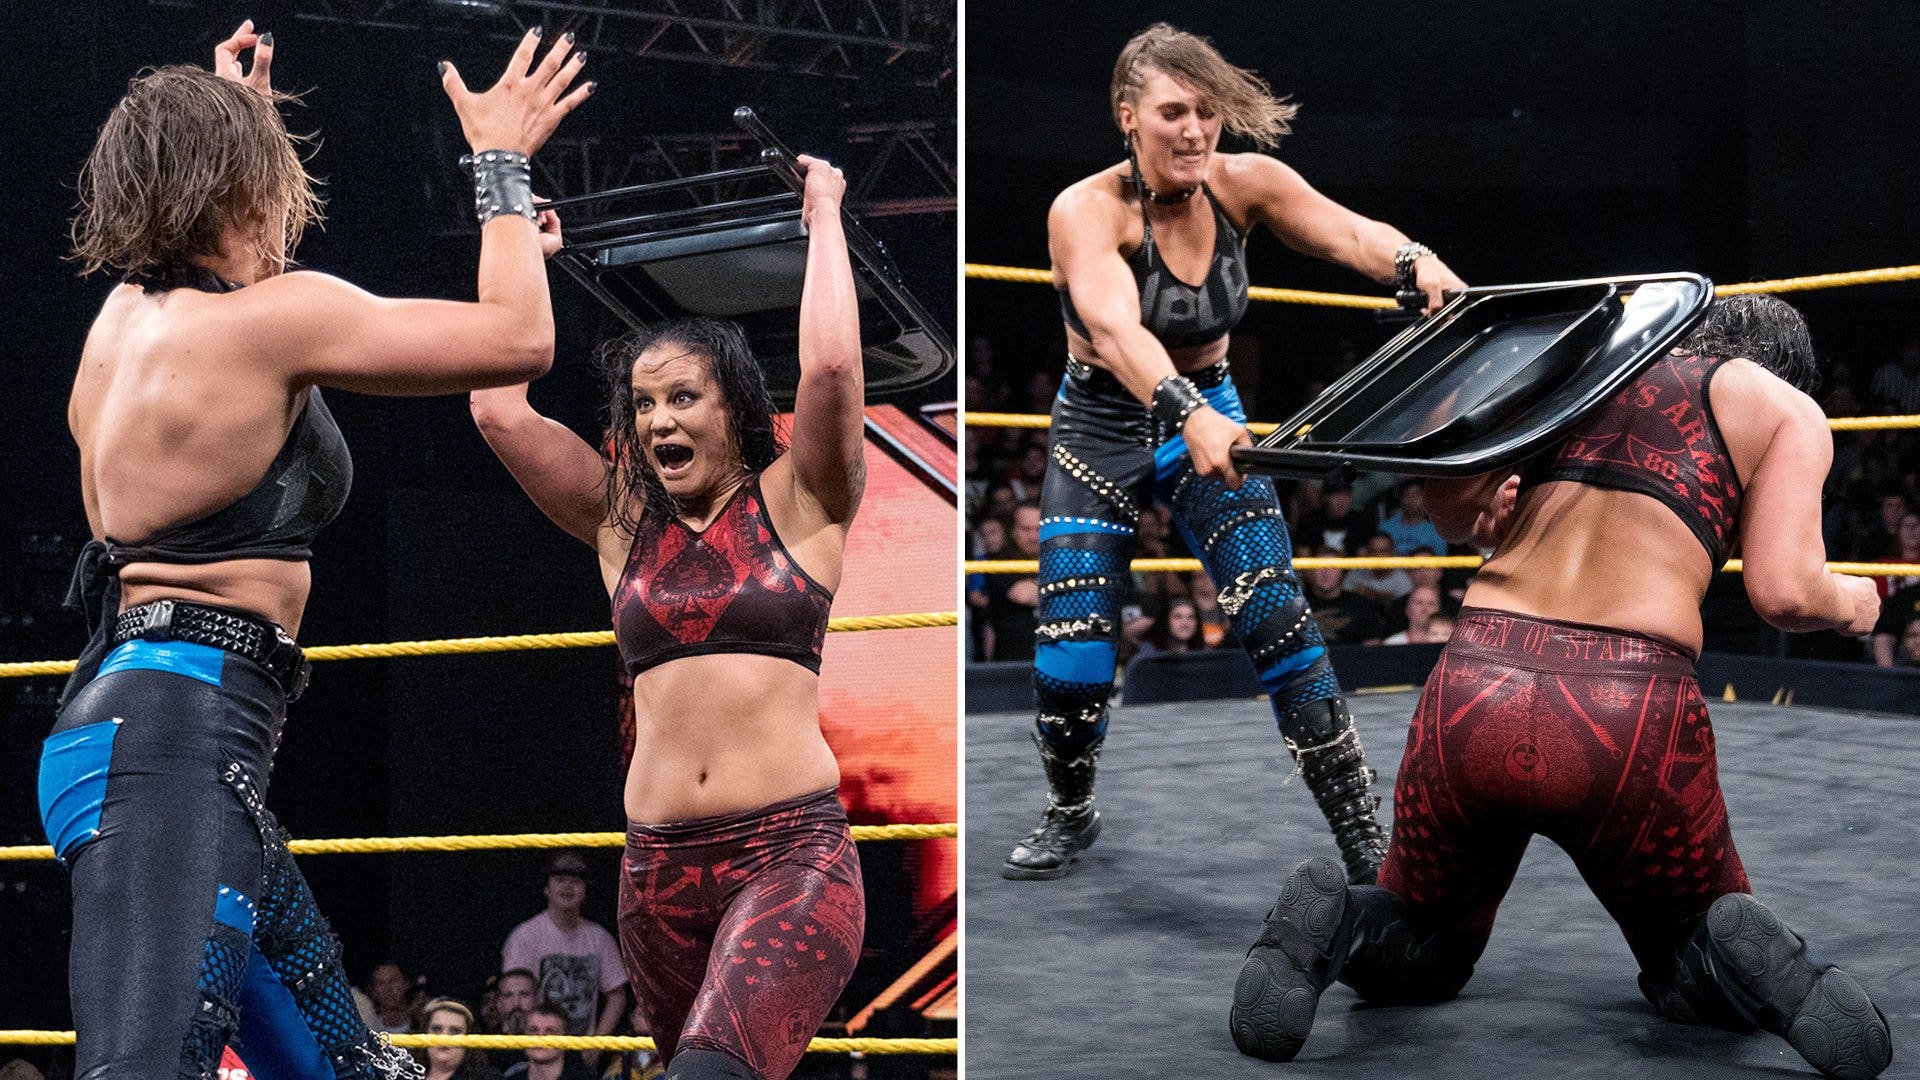 Wwe Nxt Sept 11 2019 Fox Sports Images, Photos, Reviews